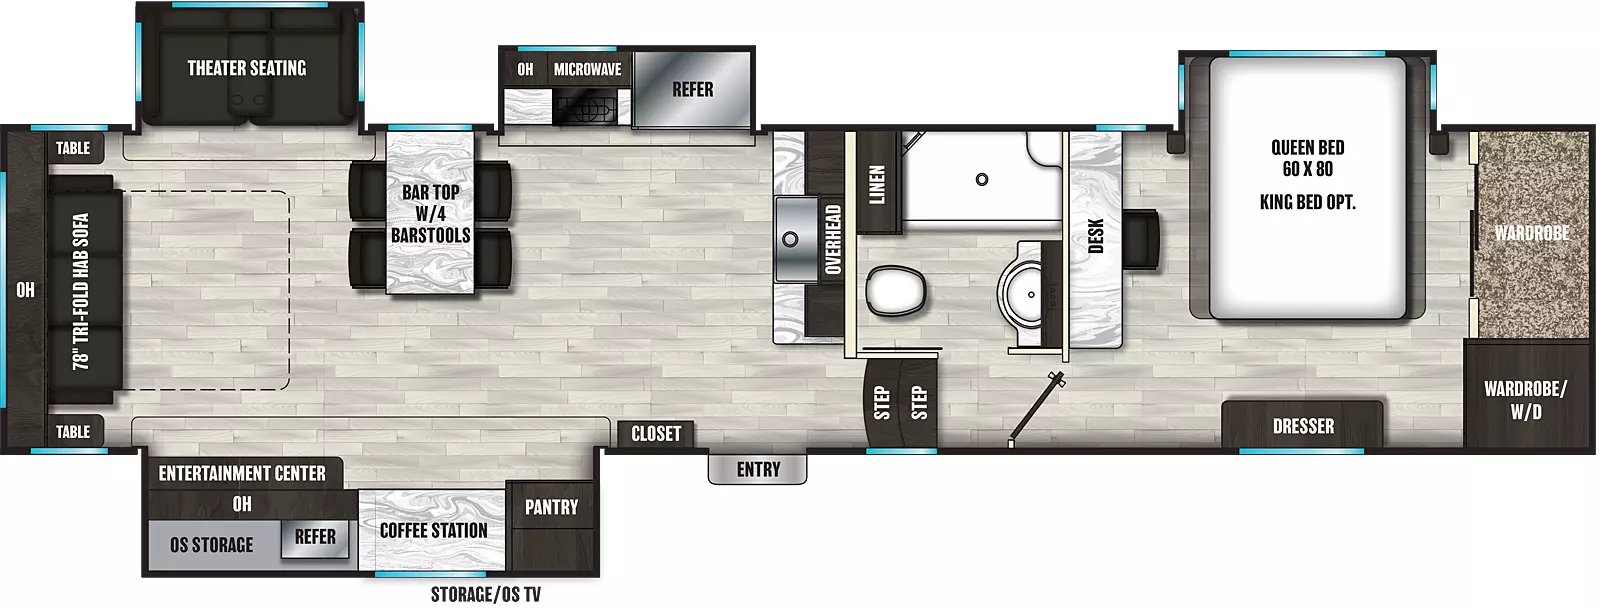 The 352RLD has four slideouts and one entry. Exterior features include refrigerator, overhead cabinet, storage and TV. Interior layout front to back: wardrobe with washer/dryer, off-door side queen bed slideout, door side dresser, and desk along inner wall; off-door side full bathroom with linen cabinet; two steps down to entry and closet; kitchen counter with sink and overhead cabinet along inner wall; off-door side slideout with refrigerator, microwave, overhead cabinet and cooktop; door side slideout with pantry, coffee station, and entertainment center; off-door side bar top with four bar stools; off-door side theater seating slideout; rear tri-fold hide-a-bed sofa with overhead cabinet and tables on each side. Optional king bed available in place of queen bed.